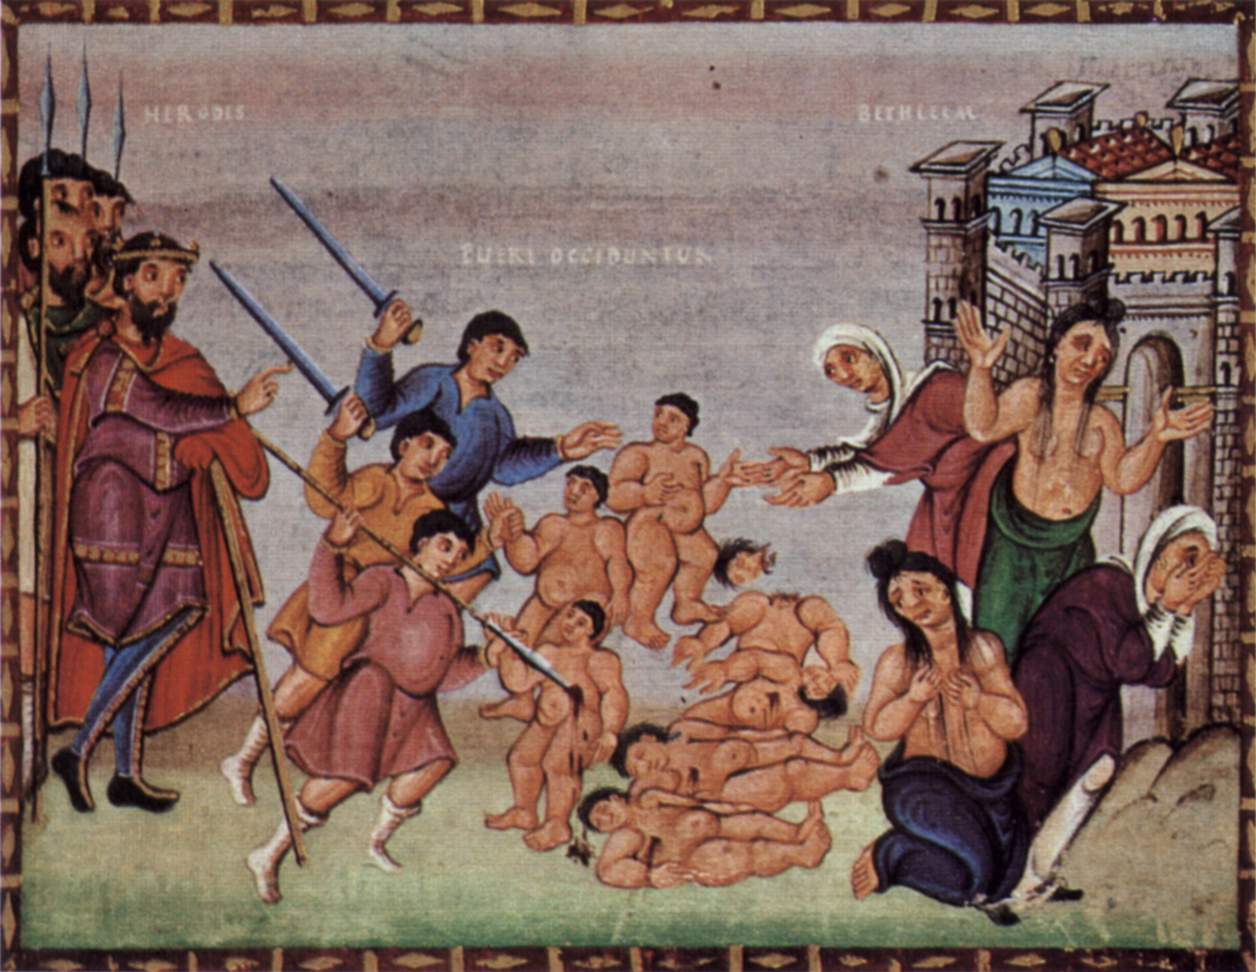 10th-century illuminated manuscript depicting the Massacre of the Innocents on paper. Currently in the collection of Stadtbibliothek in Tier, Germany.